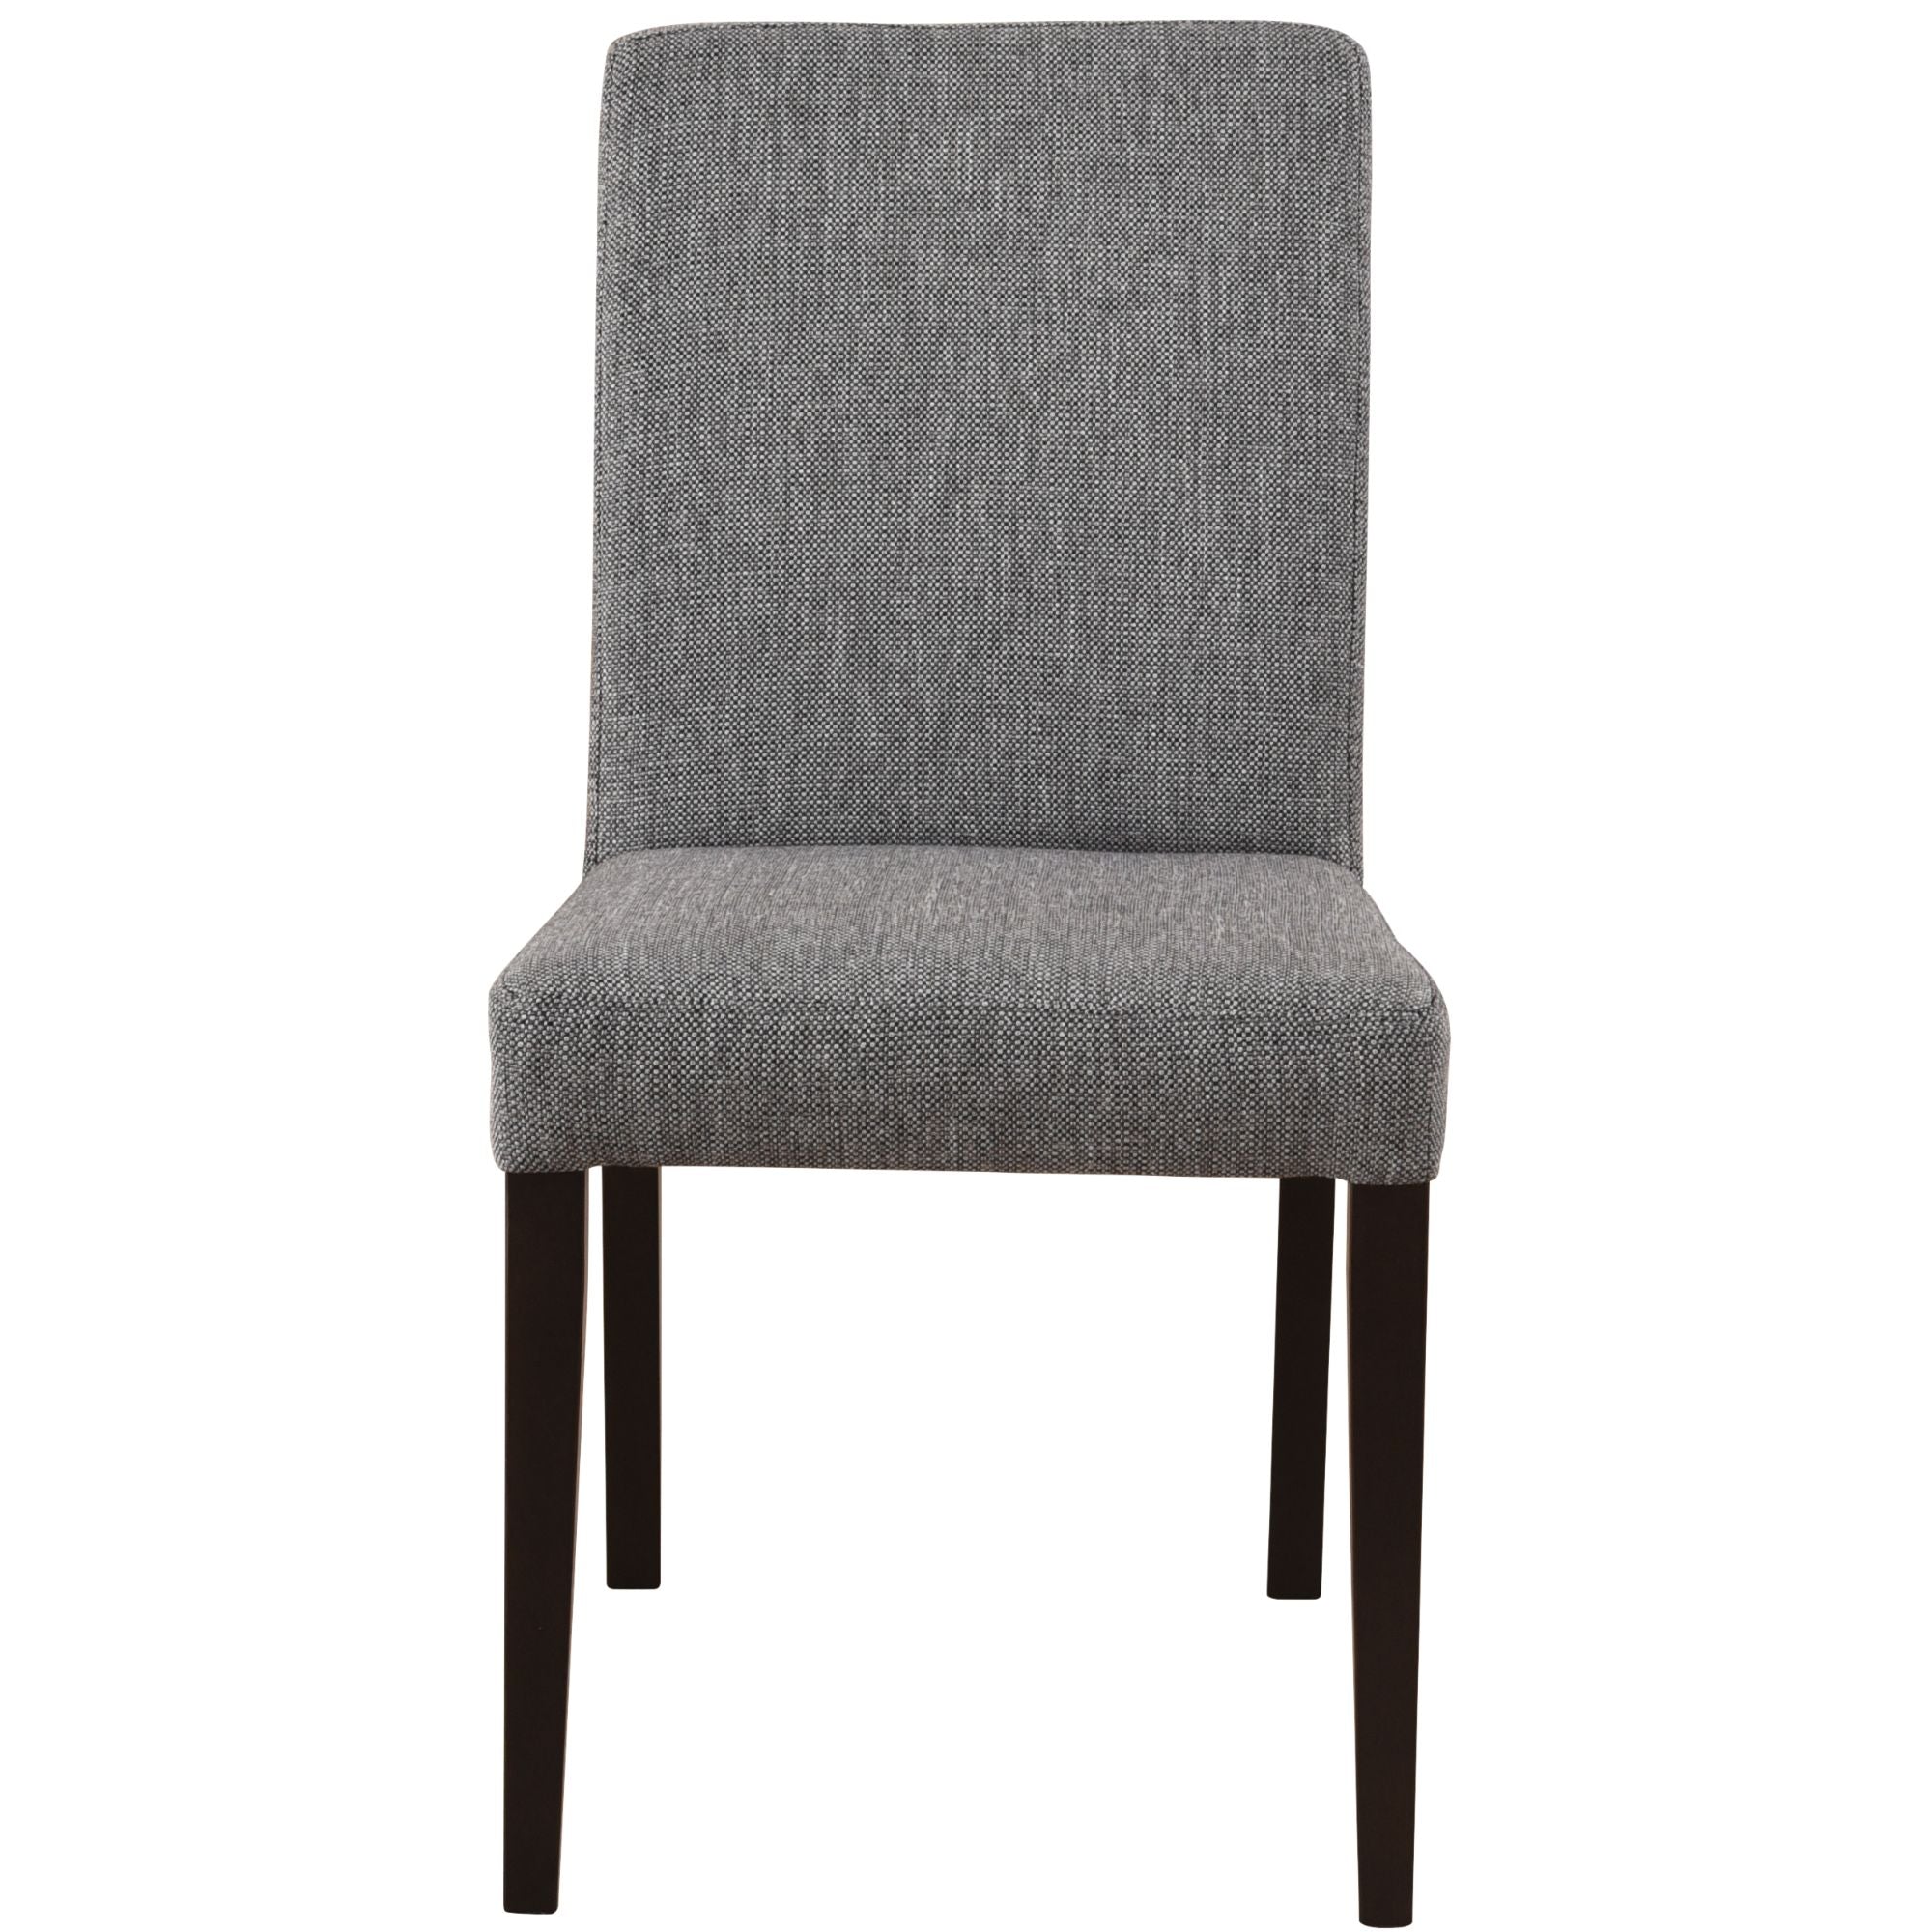 Catmint Dining Chair Set of 2 Fabric Upholstered Solid Acacia Wood - Granite Deals499